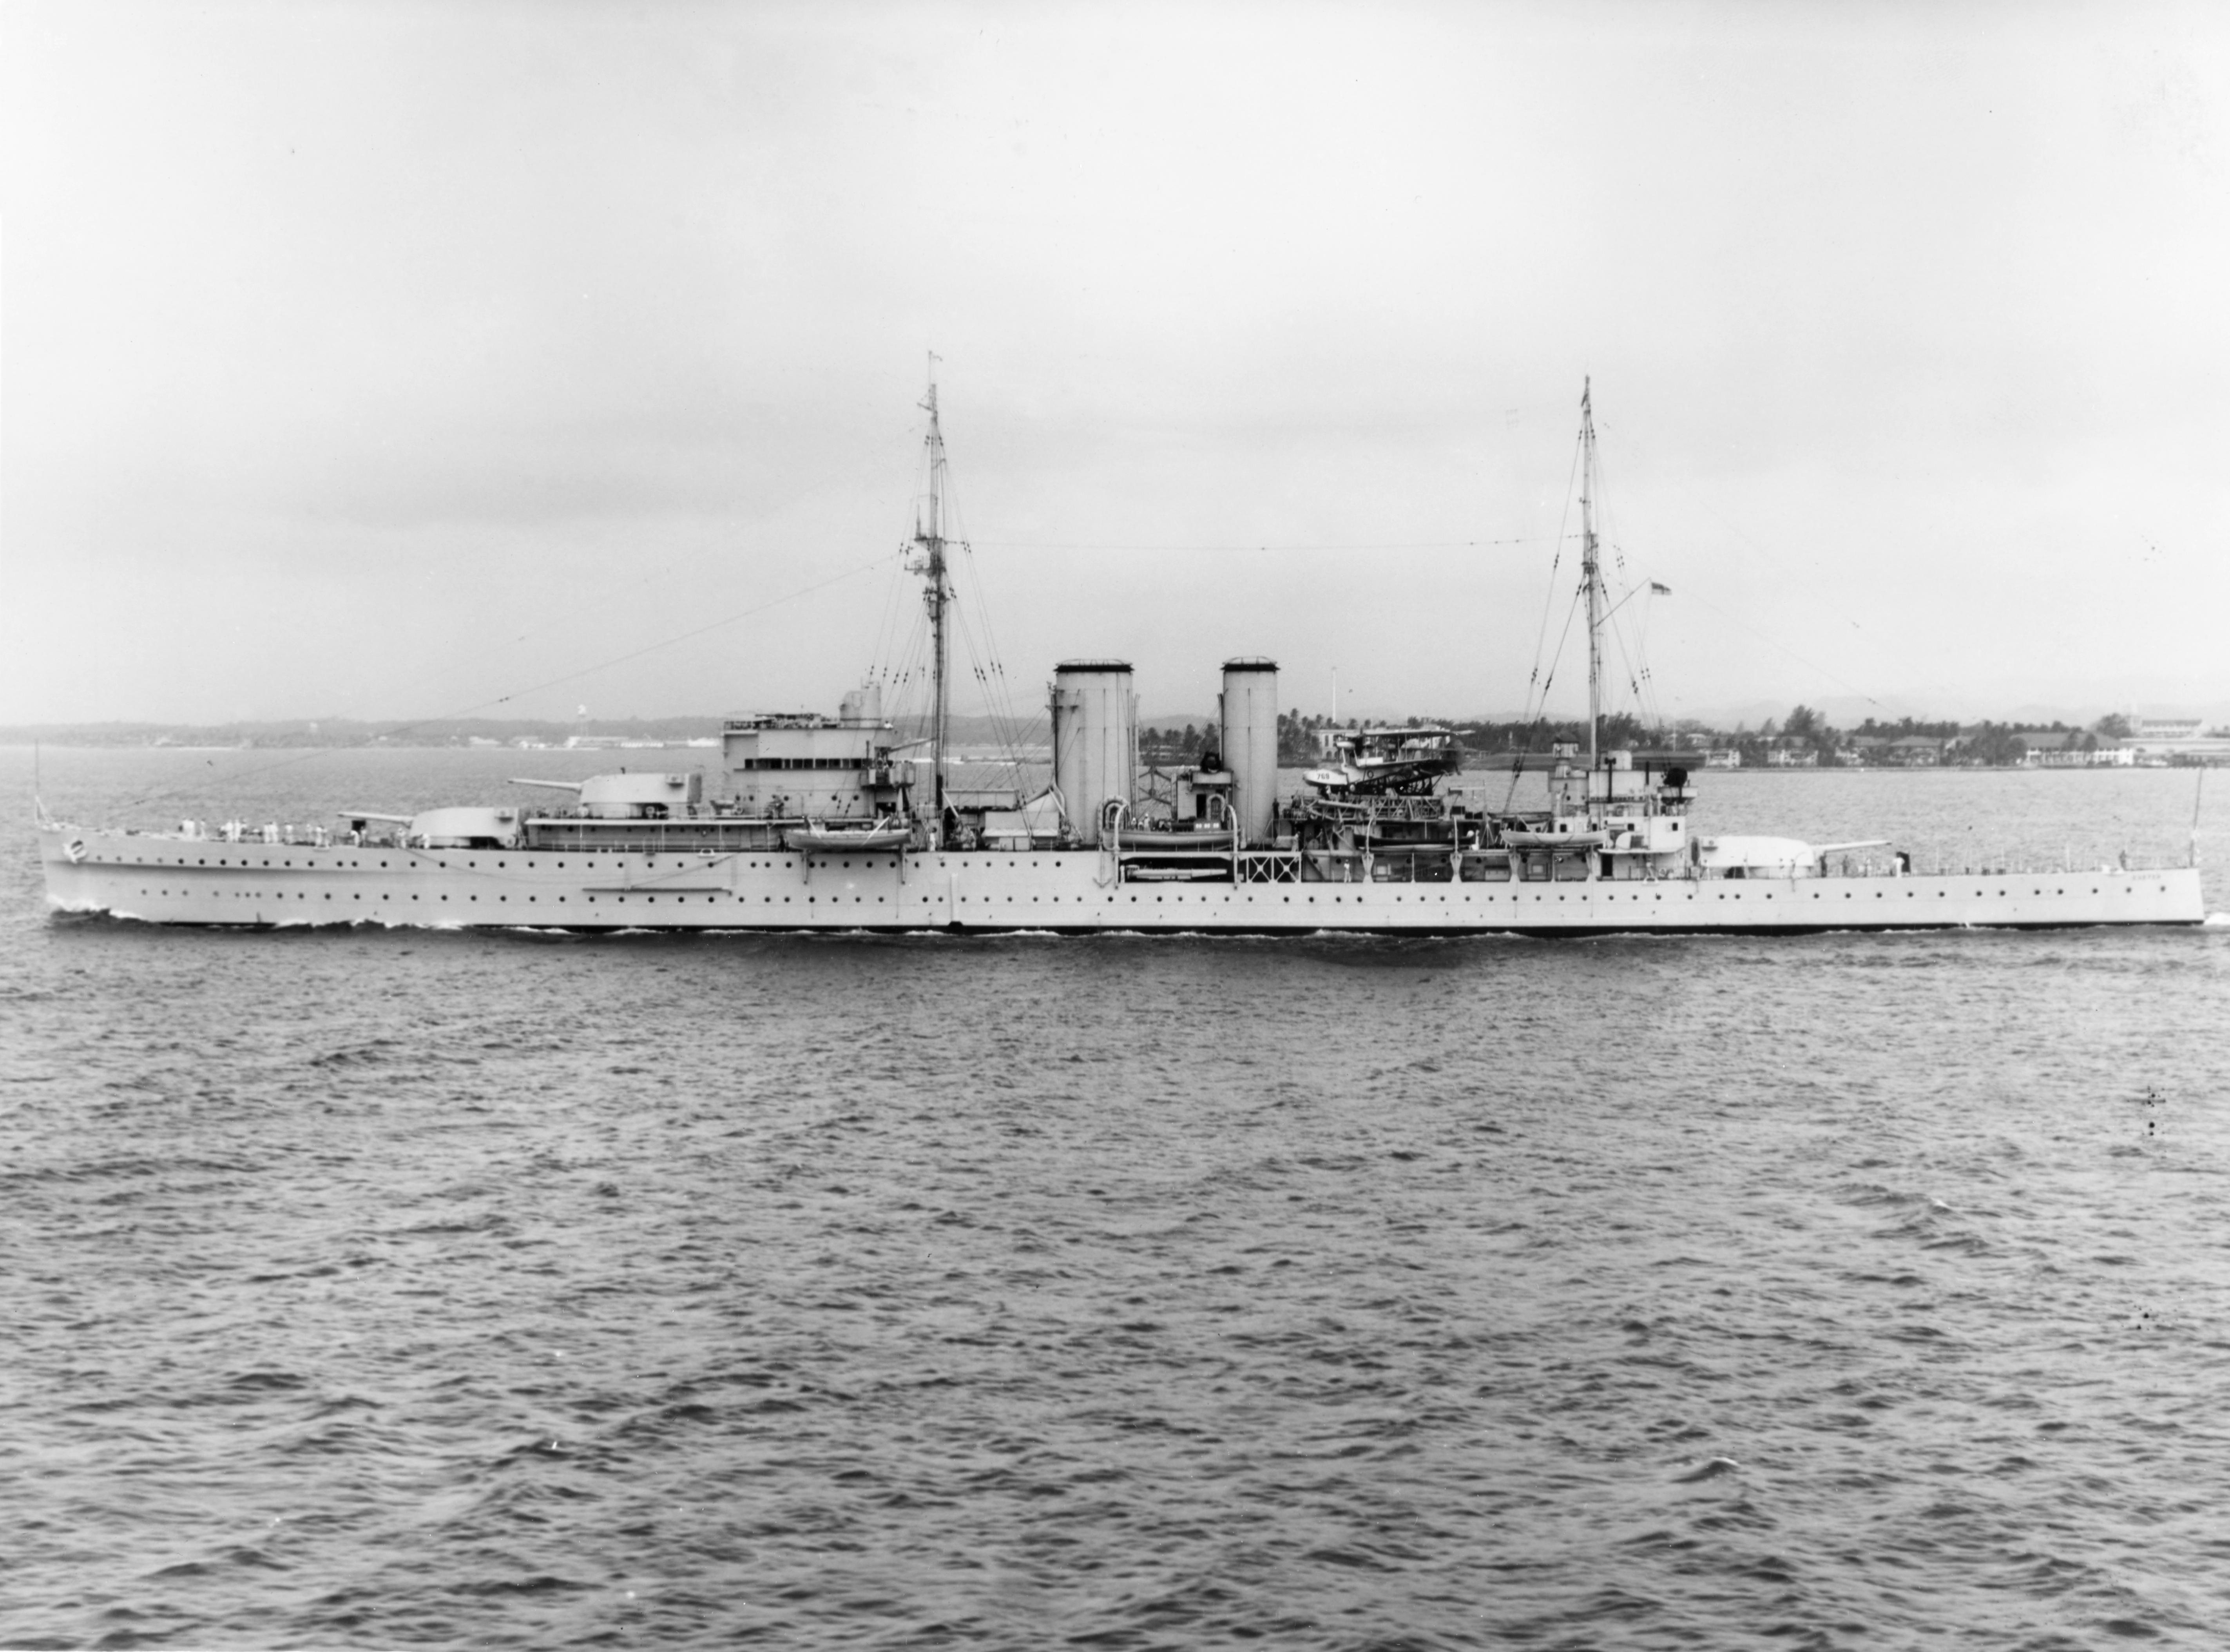 HMS Exeter off, Coco Solo, Panama Canal Zone, circa 1939